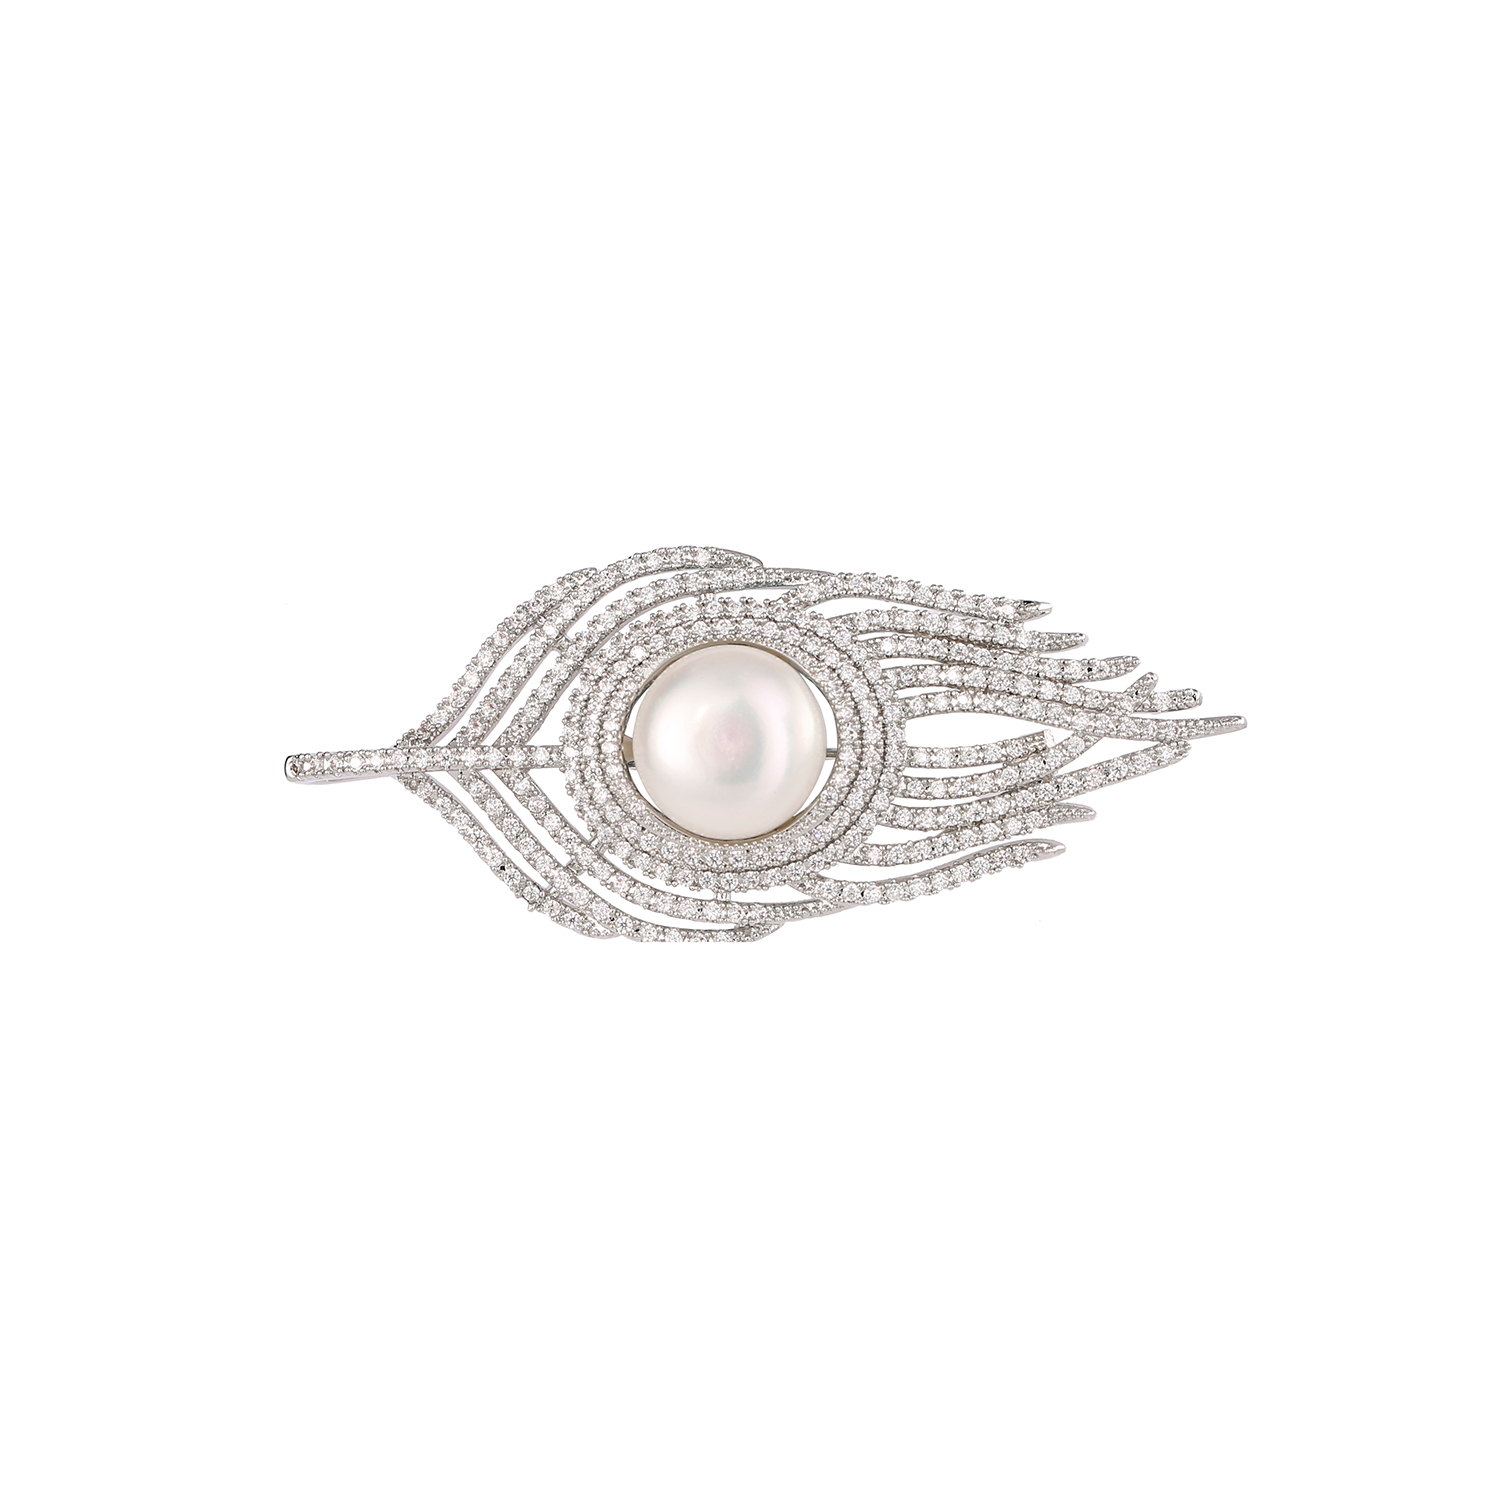 Feather 13mm Pearl Brooch Upscale delicate luxury temperament brooches luxury for women